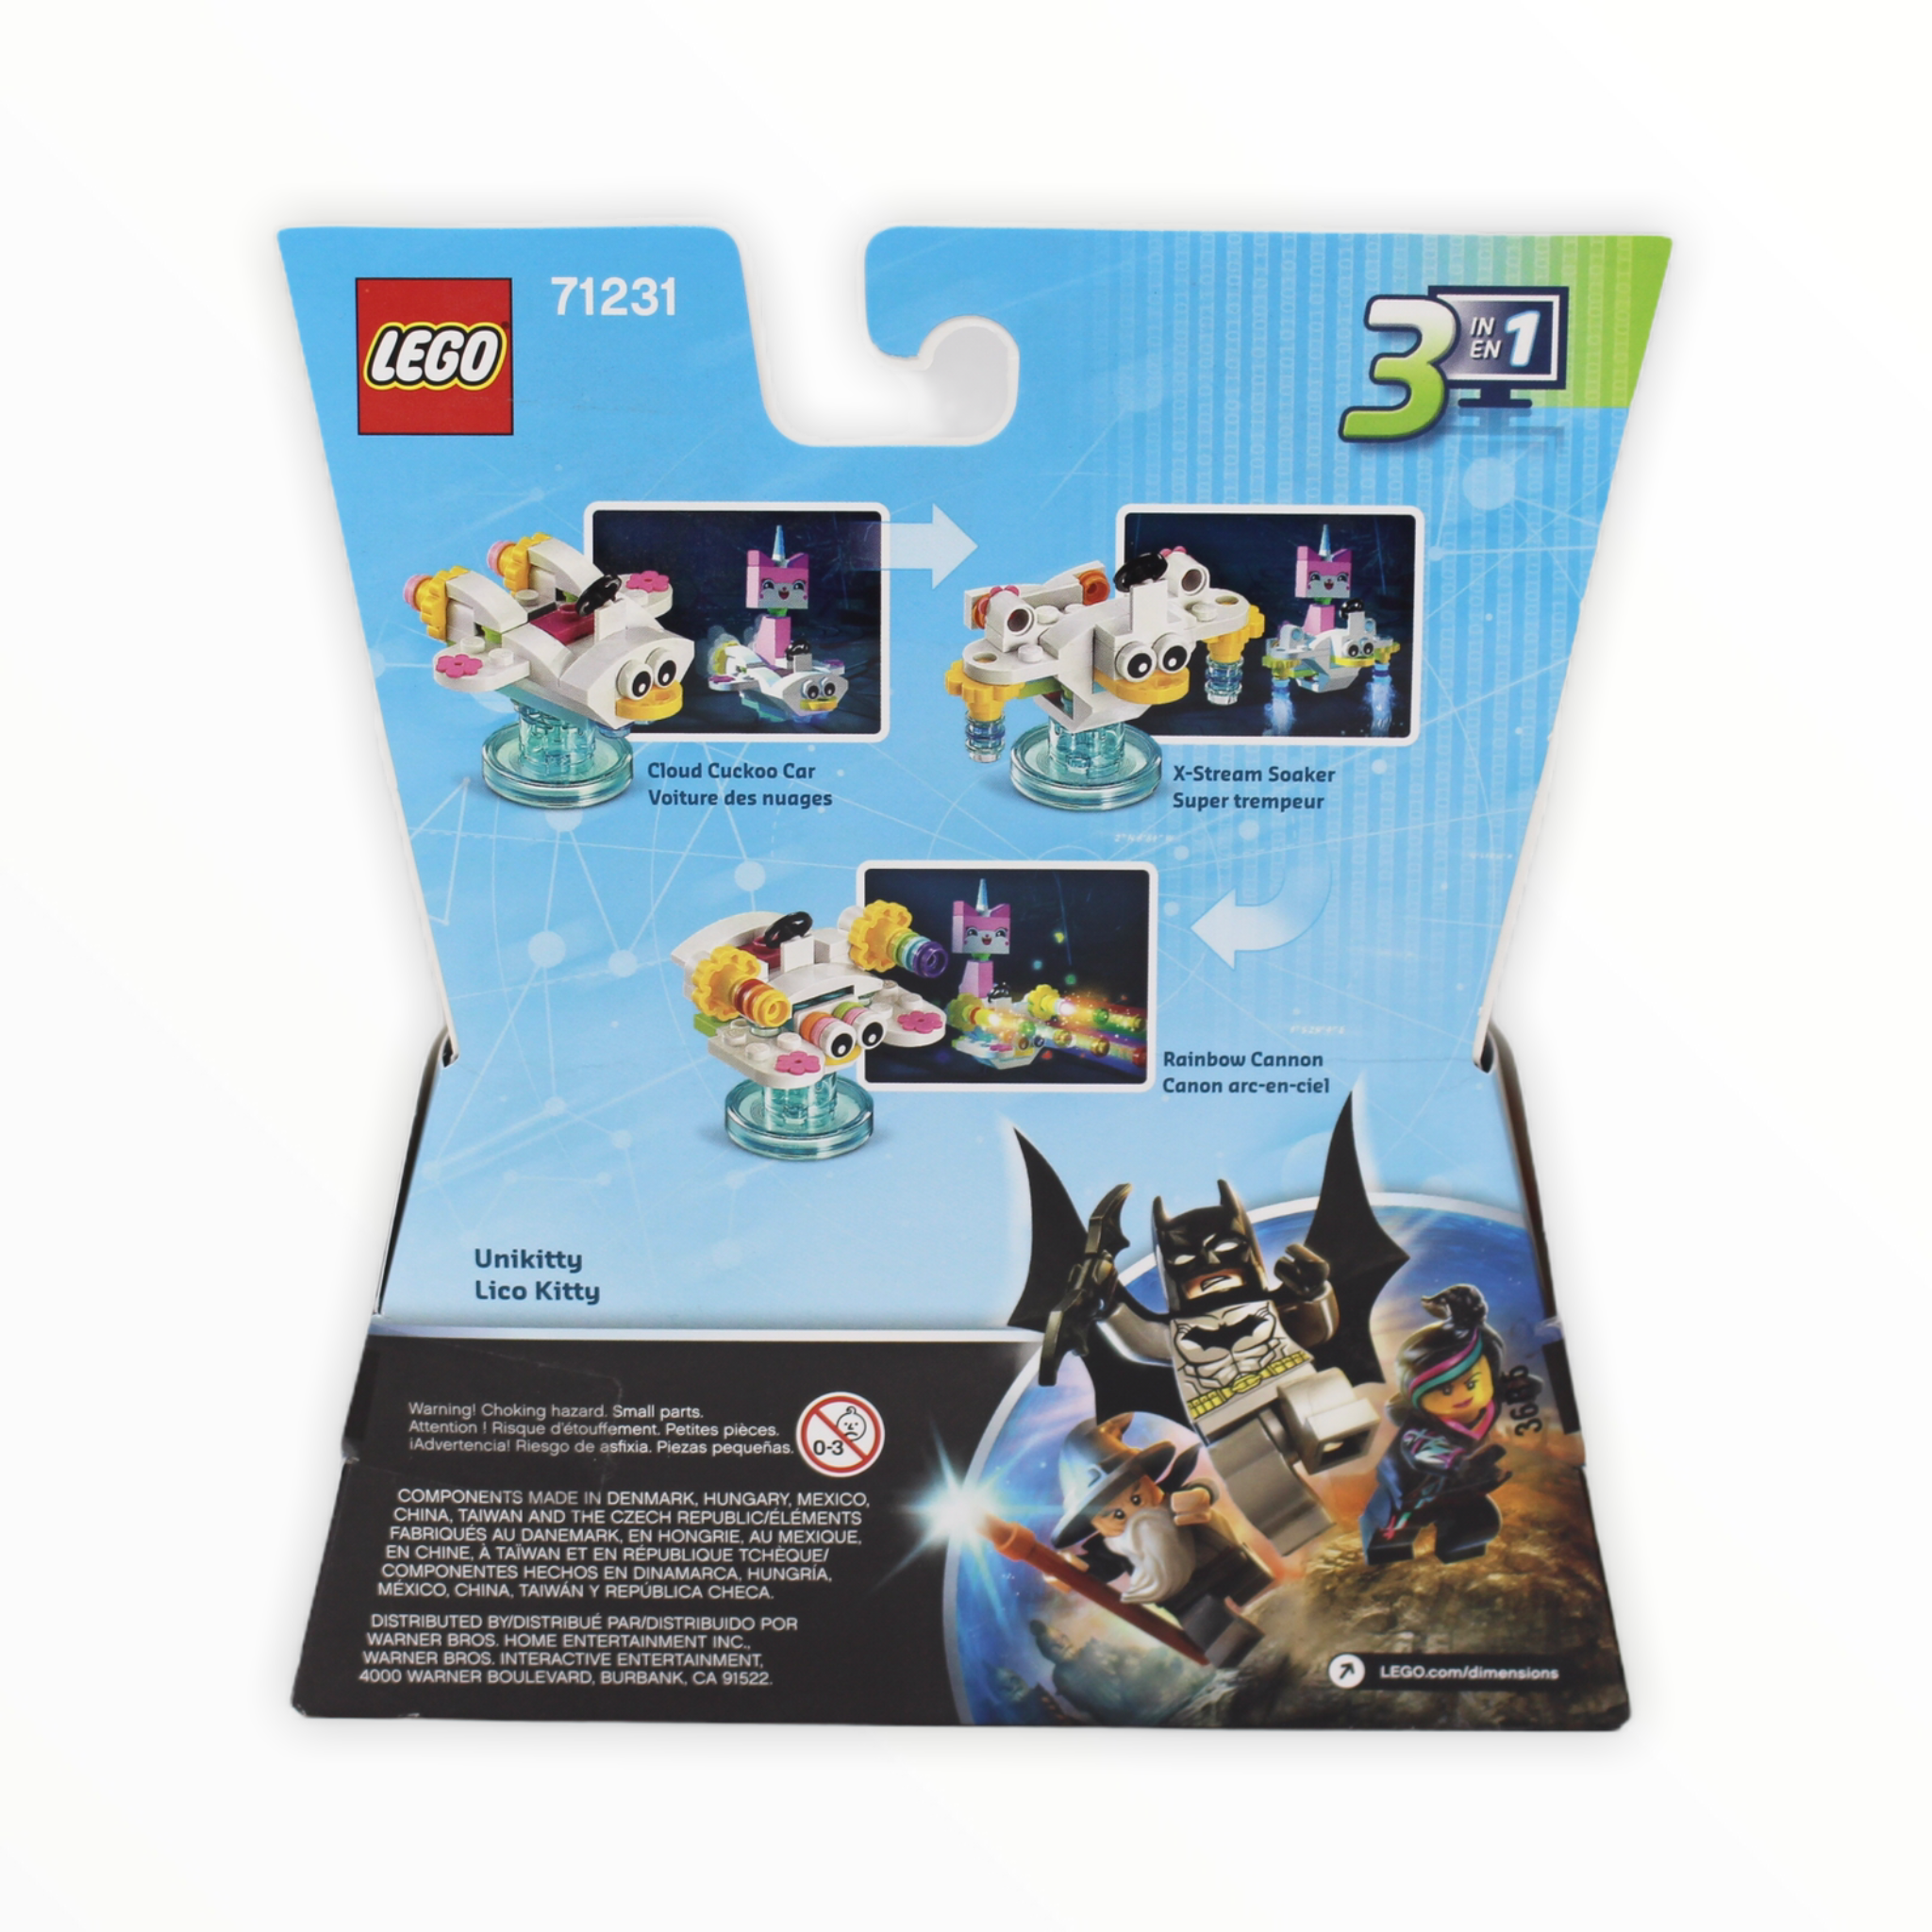 Retired Set 71231 Dimensions Fun Pack - The LEGO Movie (Unikitty and Cloud Cuckoo Car)